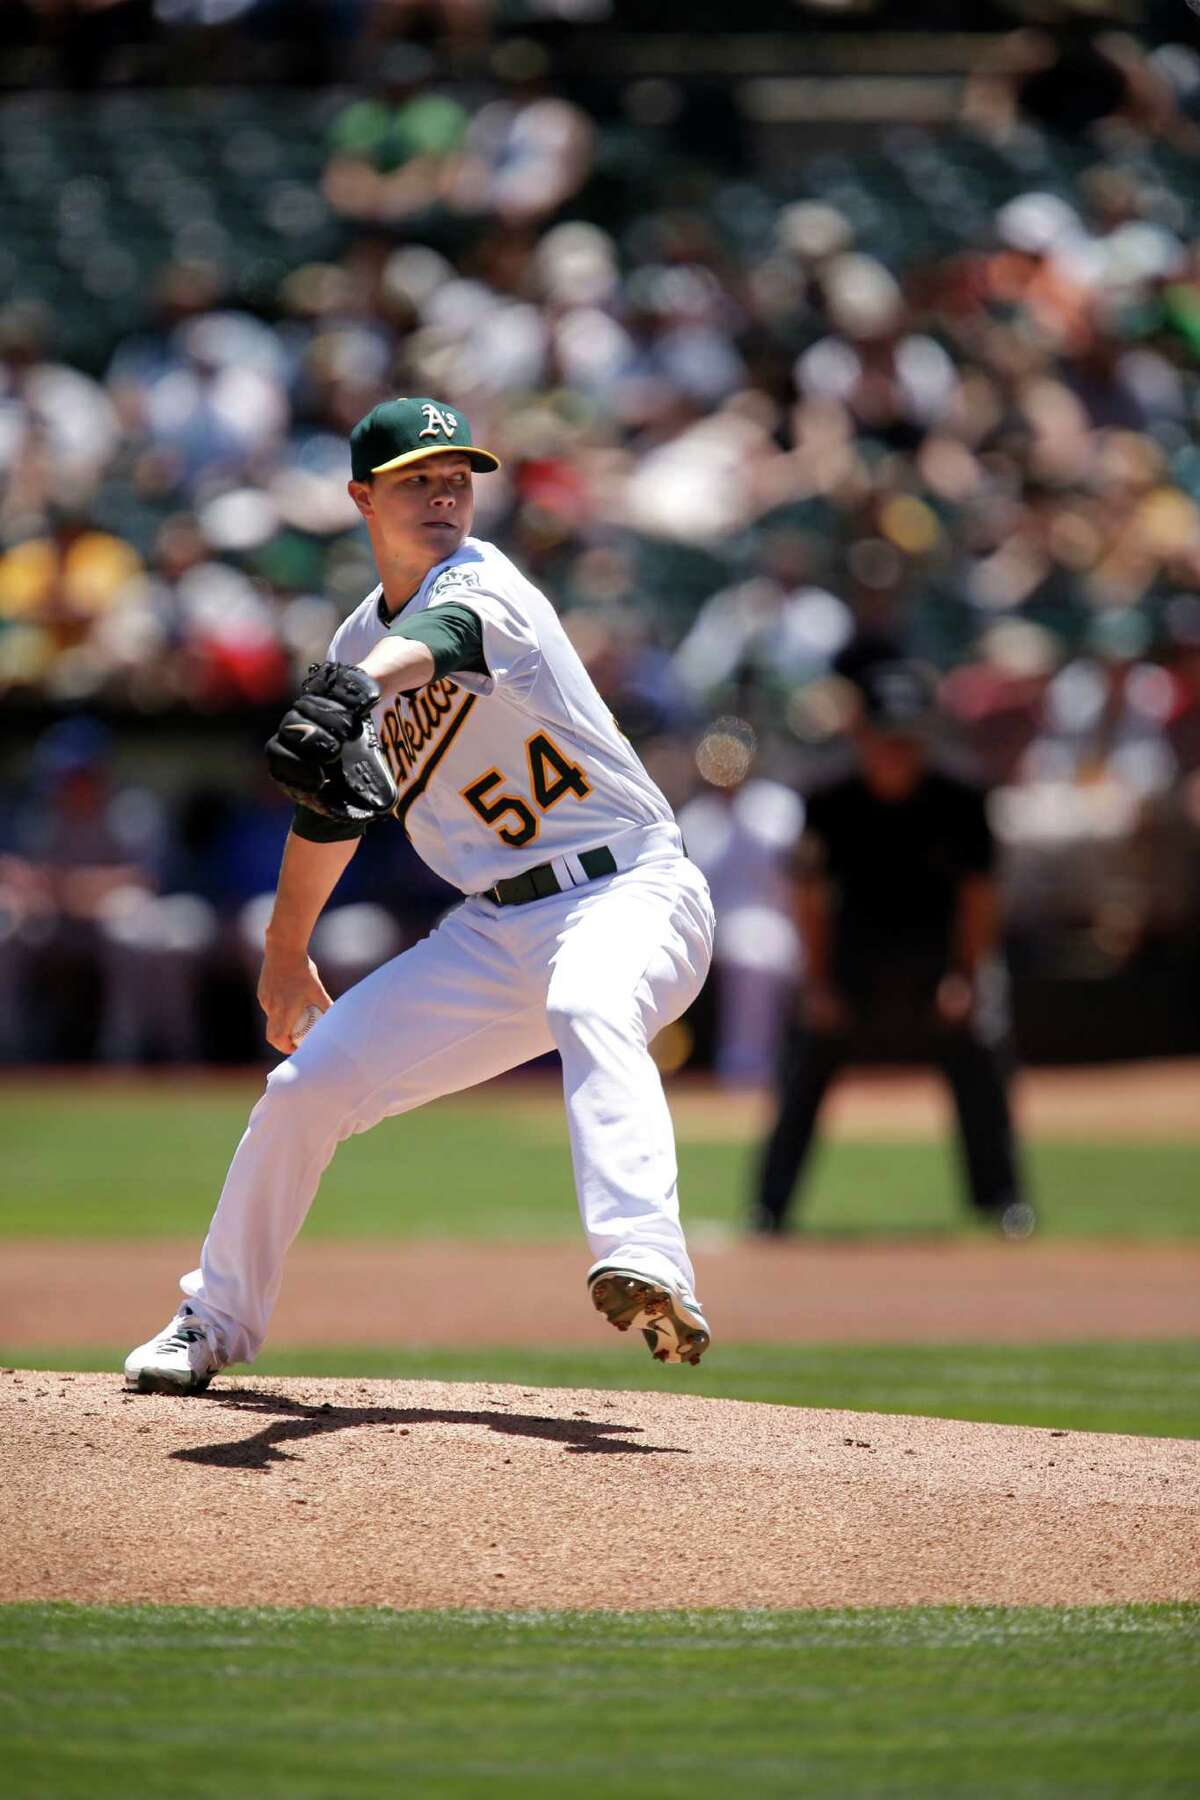 Oakland starting pitcher Sonny Gray, (54) throws in the 1st inning, as the Athletics went on to beat the Texas Rangers 4-2 at O. co Coliseum in Oakland, Calif. , on Wednesday June 18, 2014.